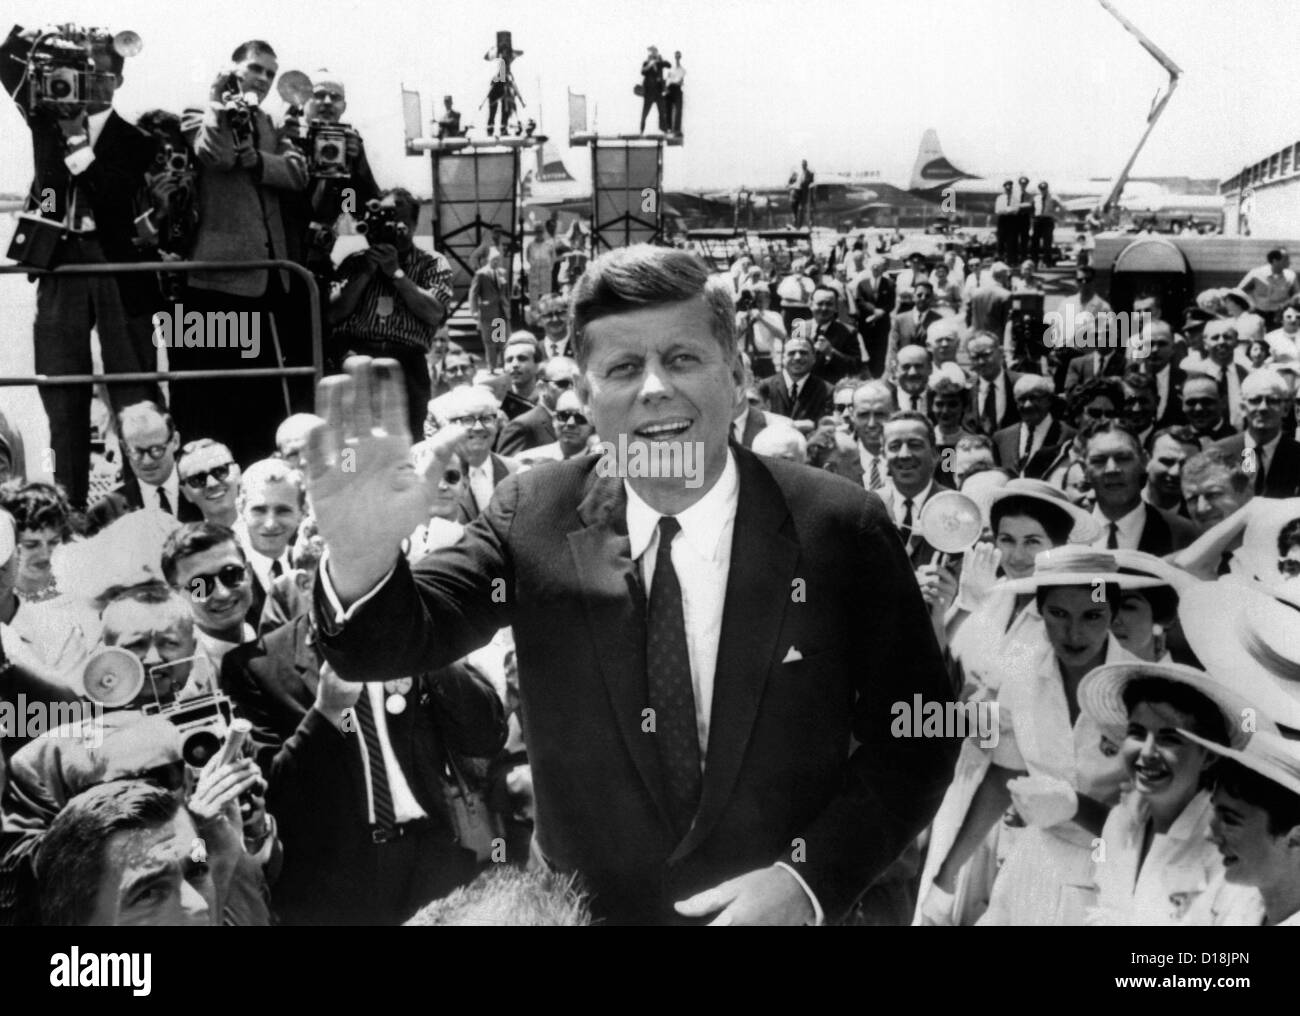 Sen. John Kennedy waves upon his arrival at Los Angeles International Airport for the 1960 Democratic Convention. He was the Stock Photo